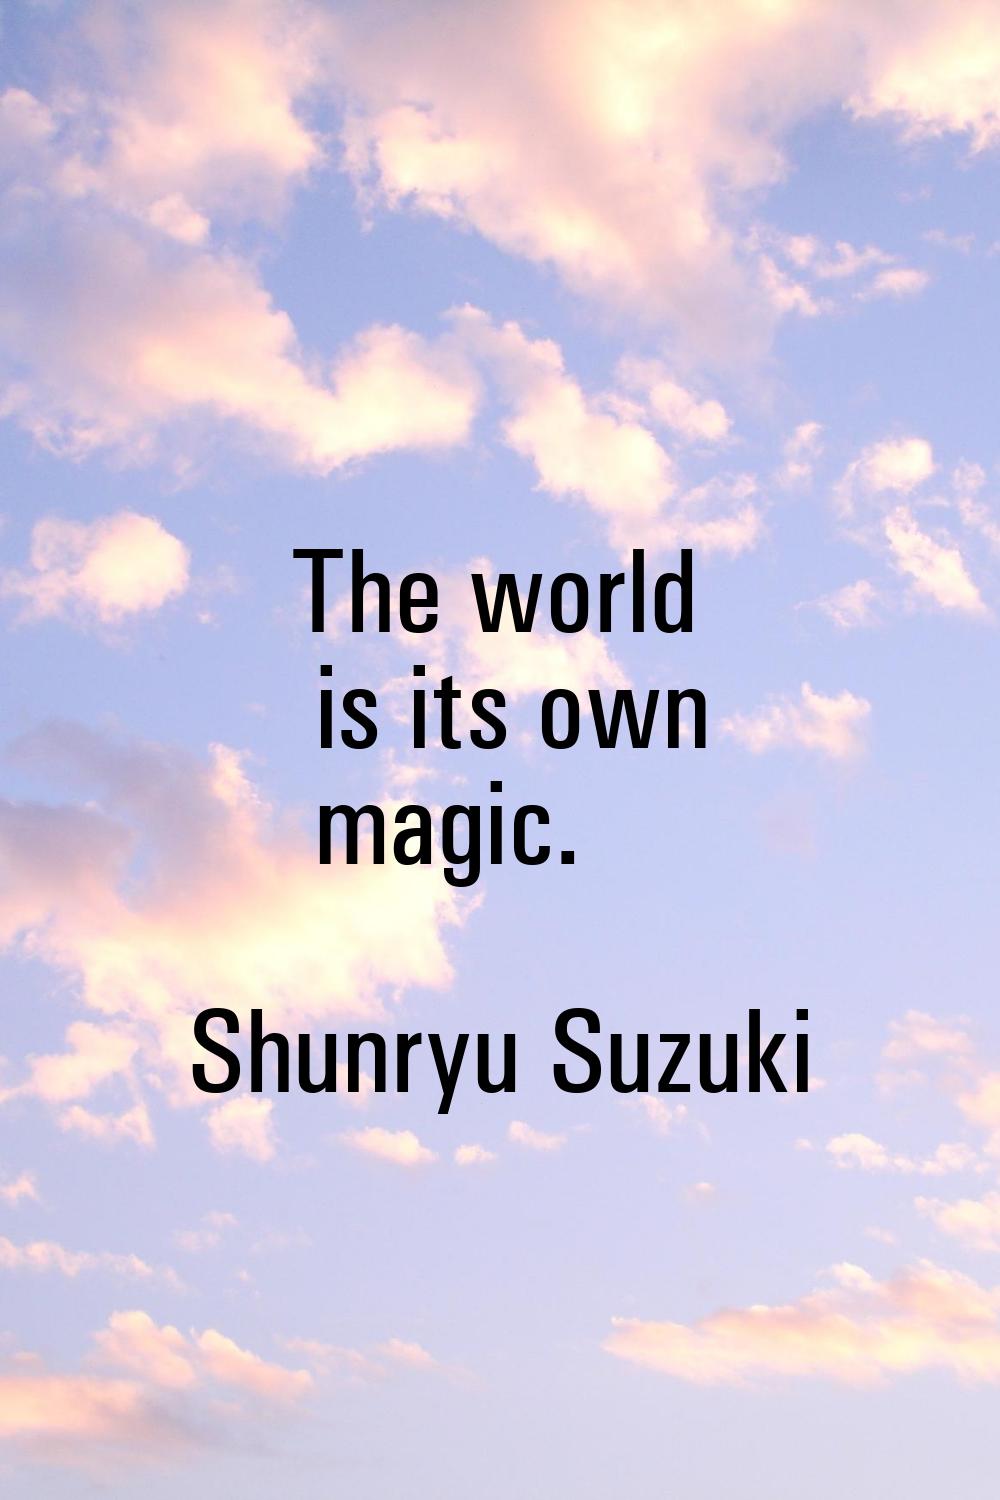 The world is its own magic.